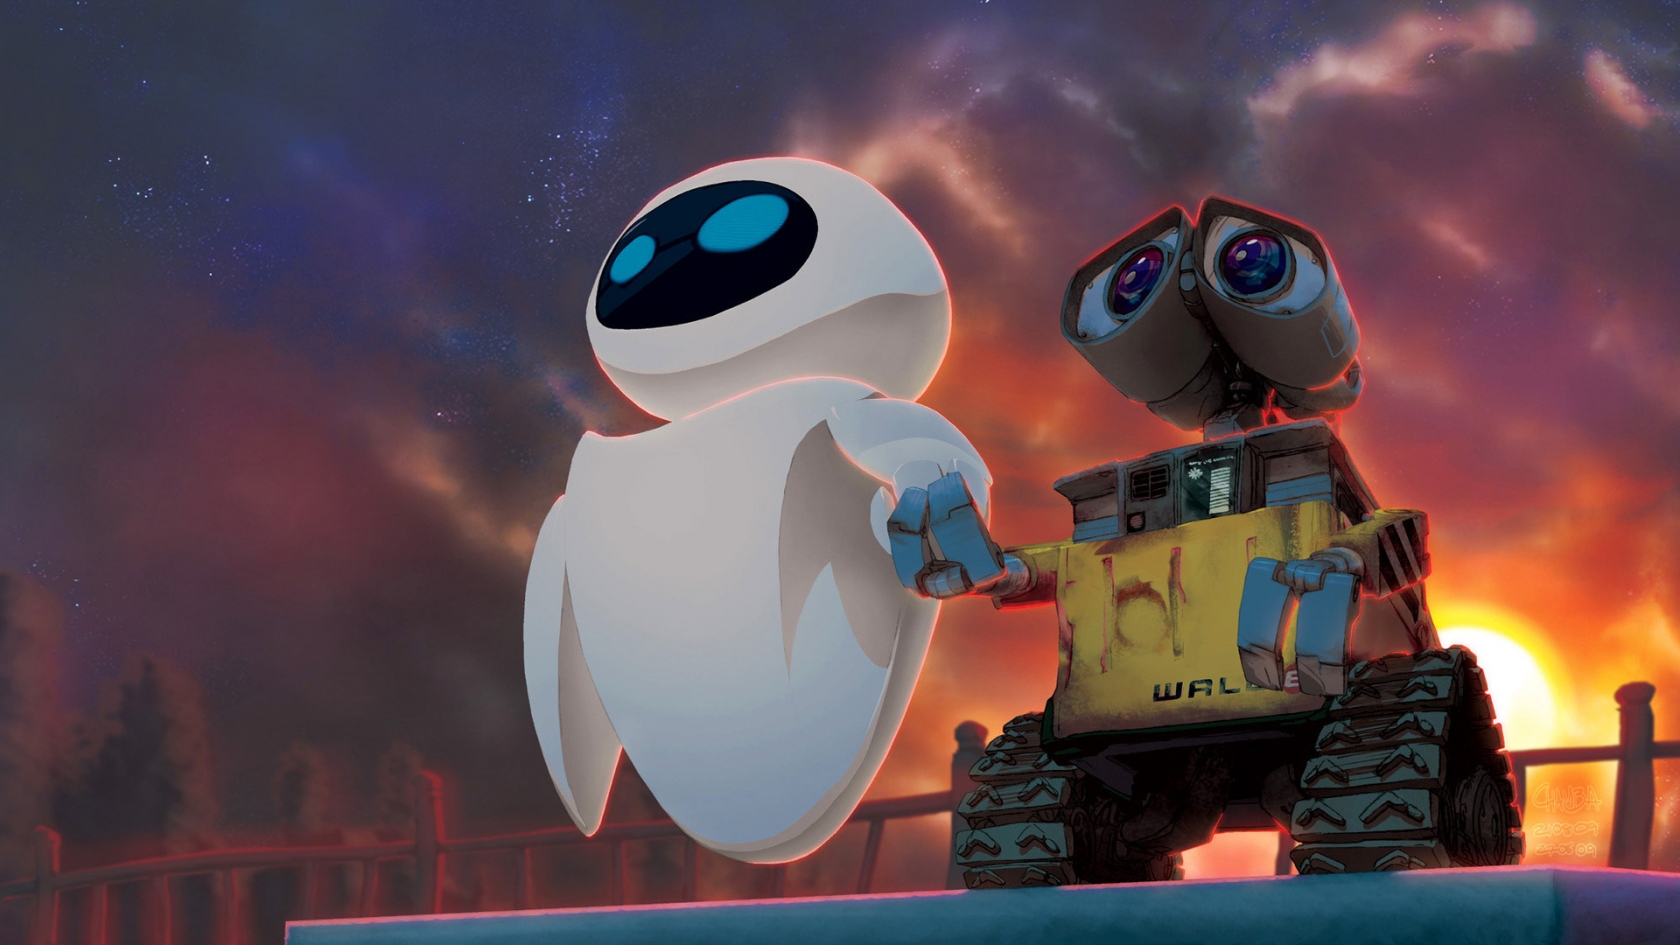 Walle Cartooned for 1680 x 945 HDTV resolution